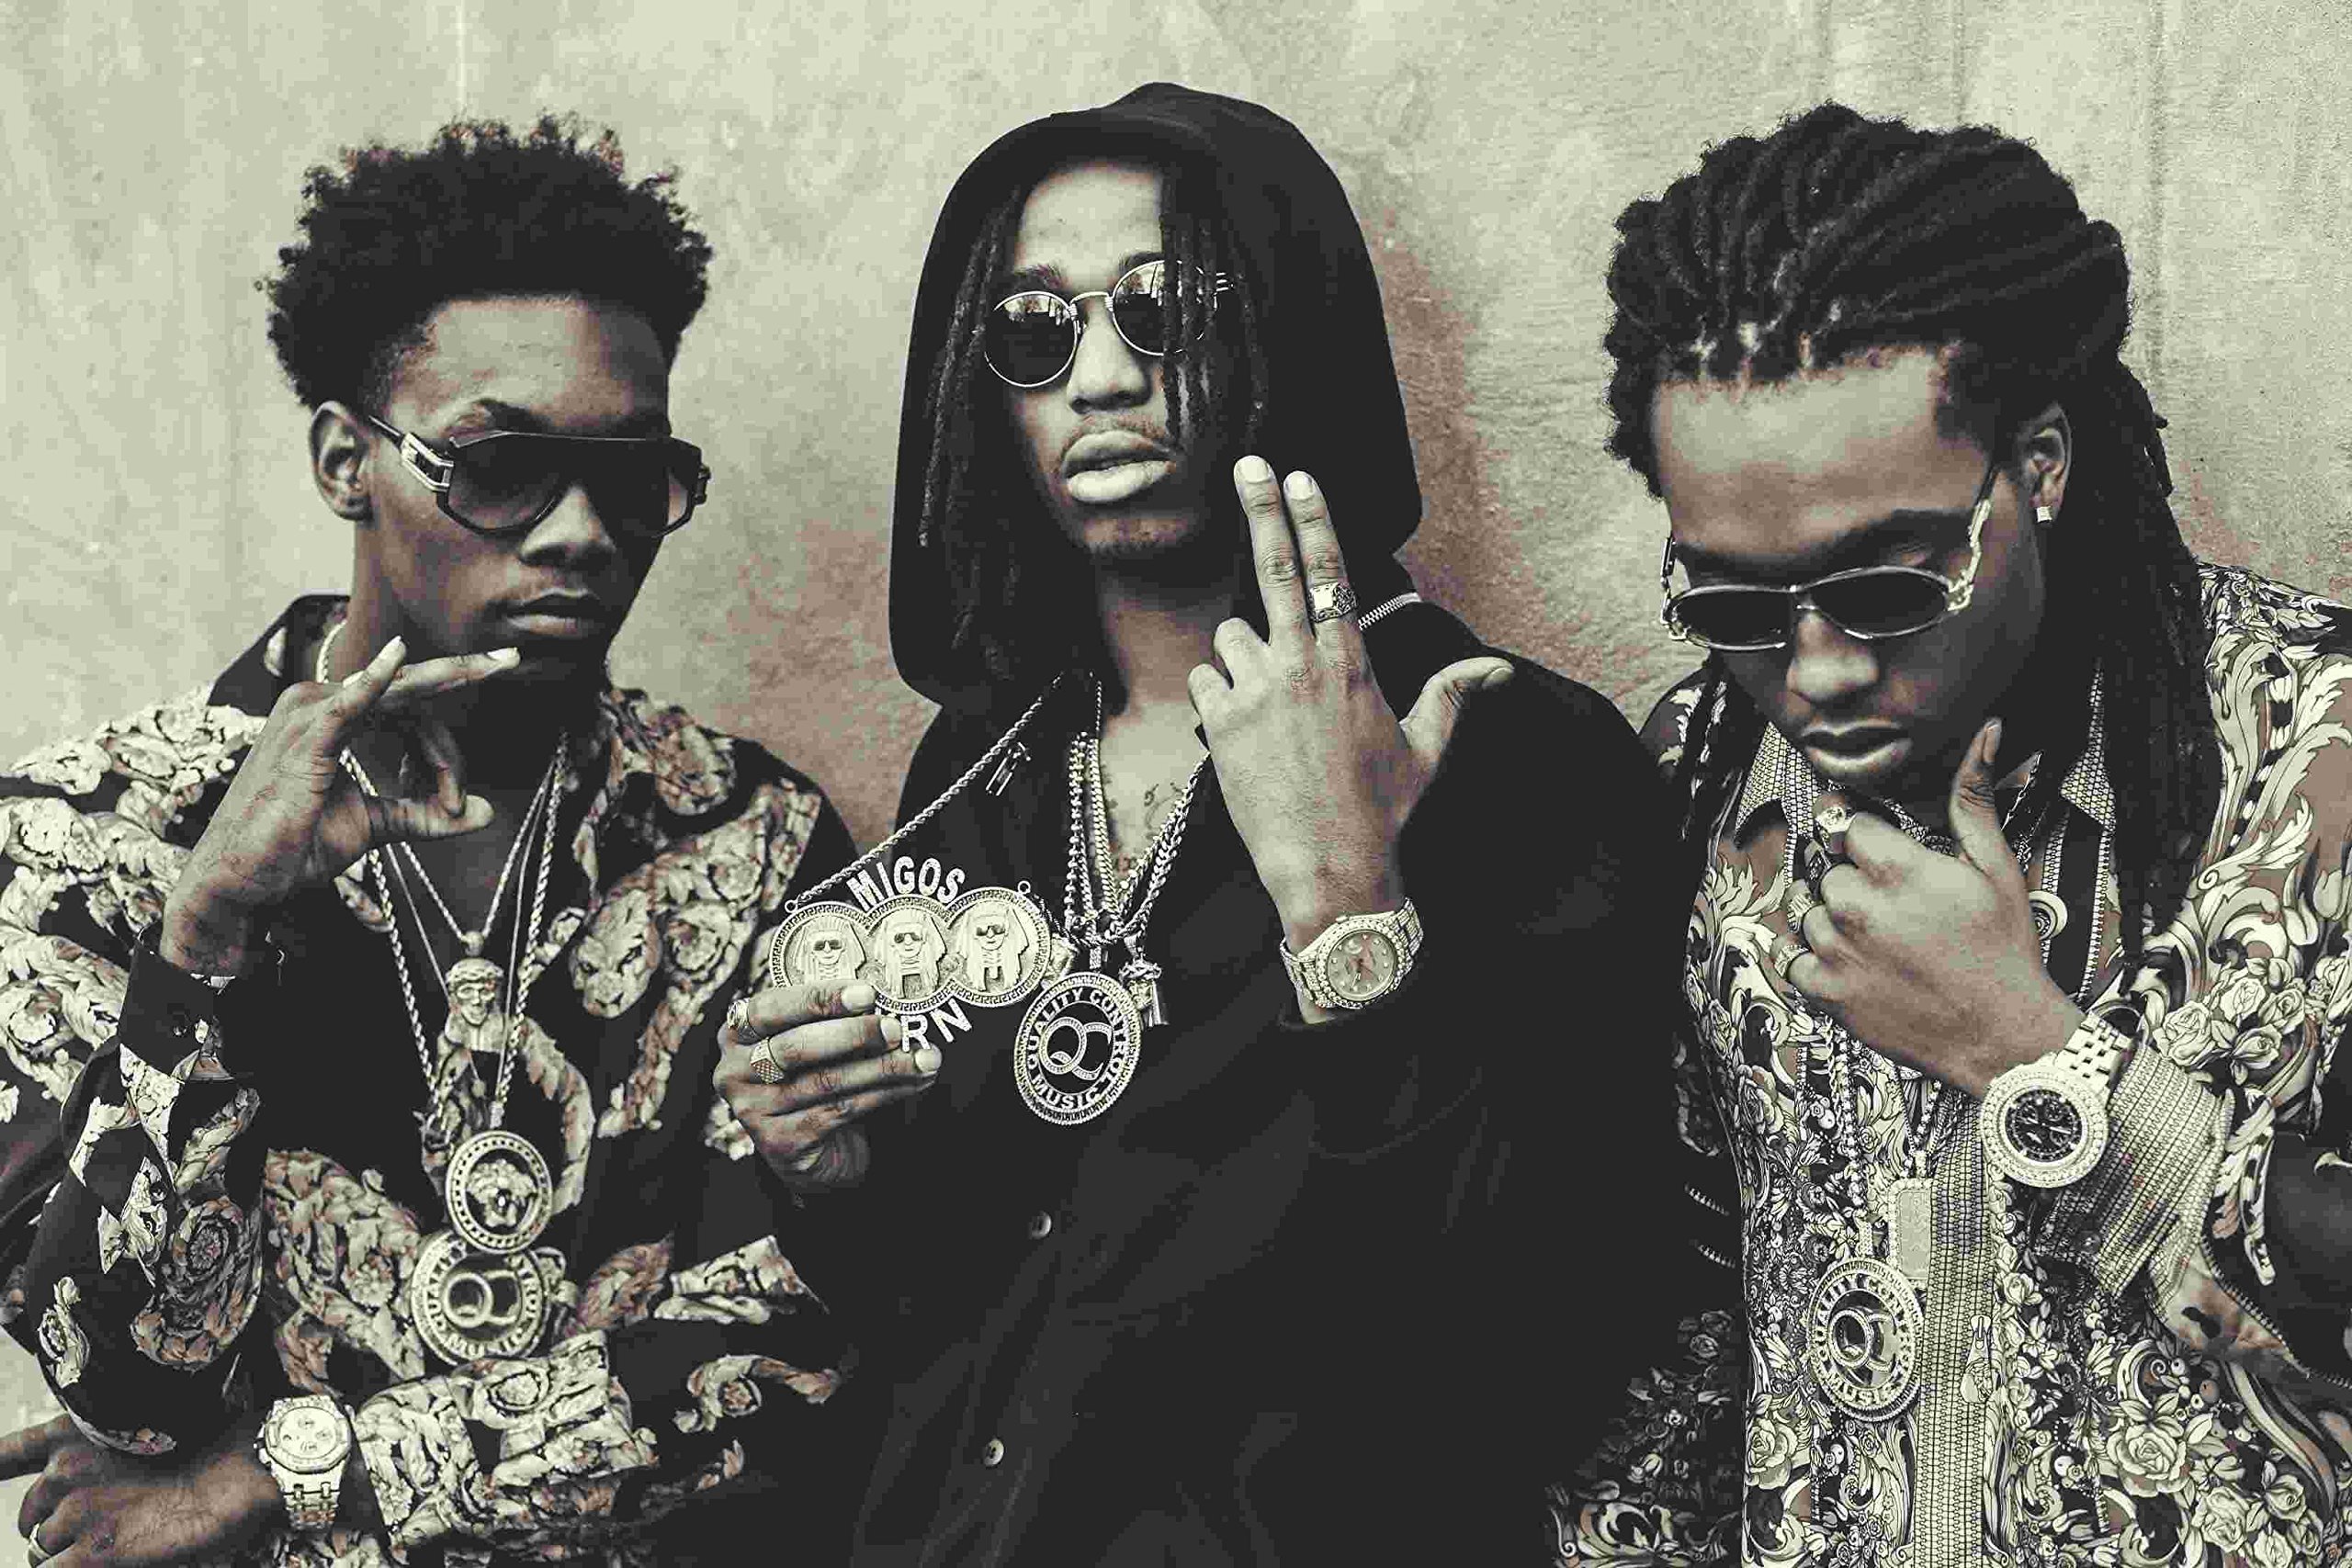 Migos Hip Hop Trio Quavo Offset Takeoff 12 x 18 Inch Poster Unframed Rolled: Posters & Prints